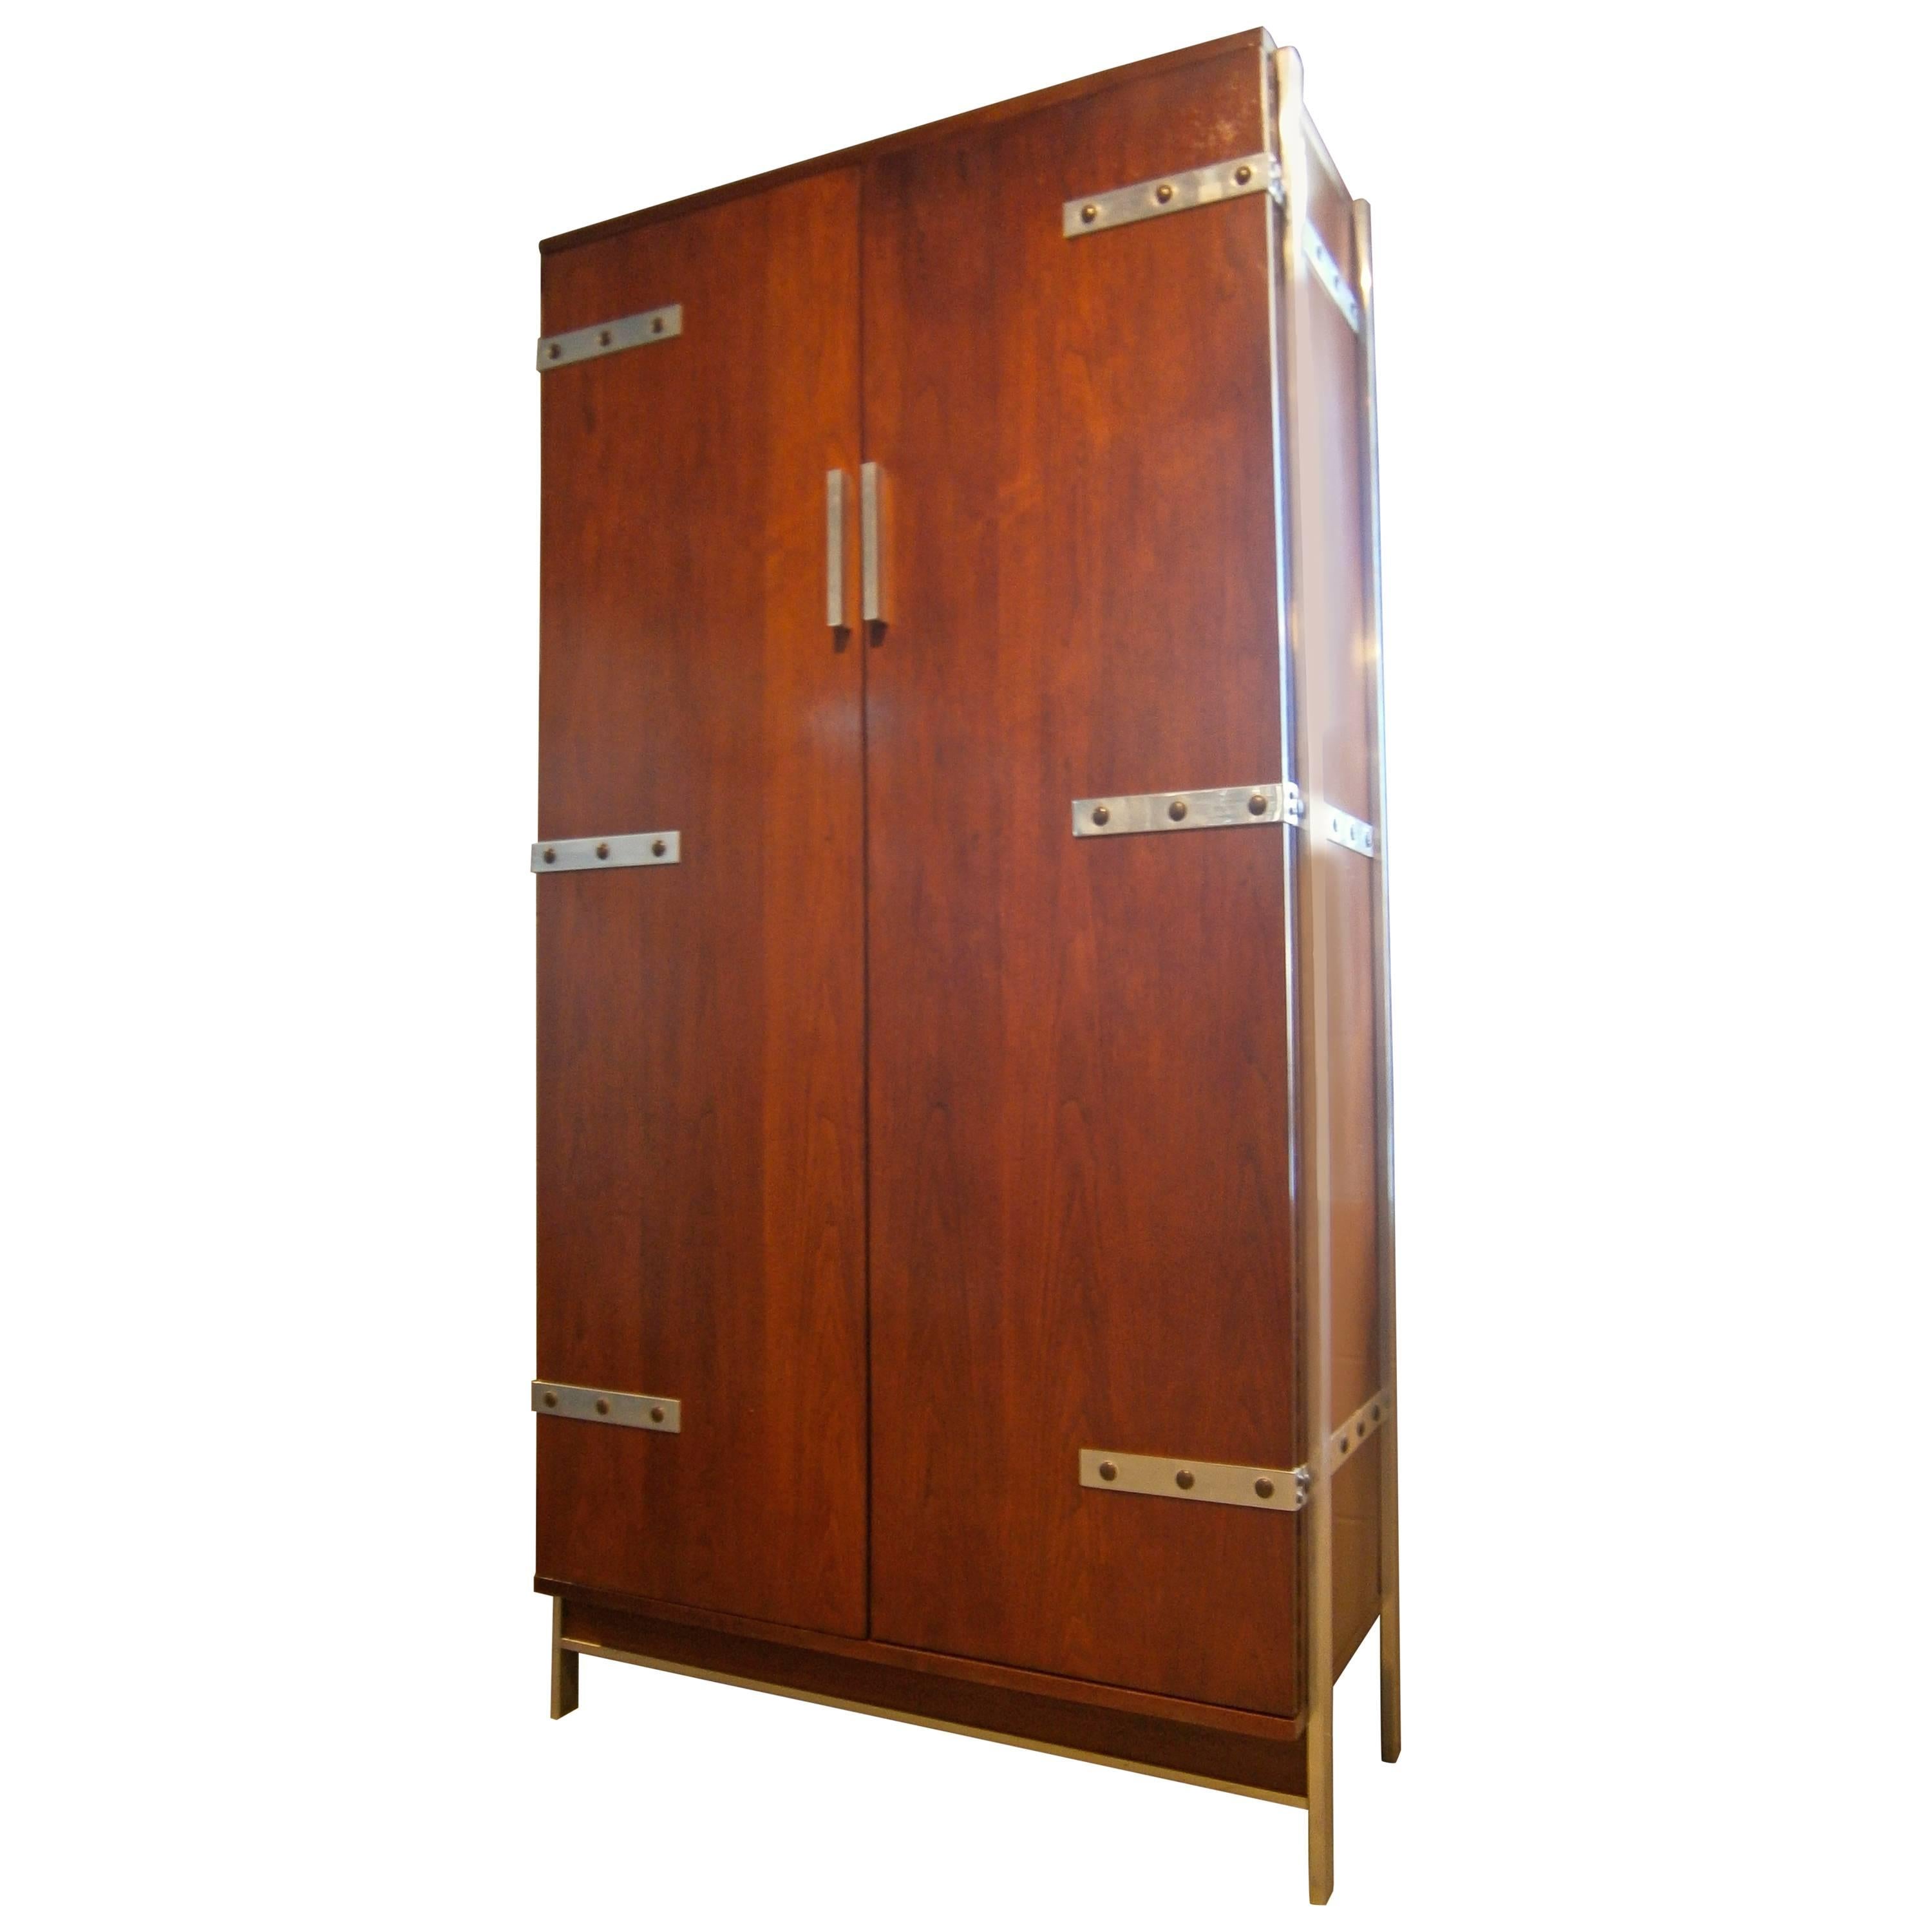 Graphic Two-Door Tall Cabinet Attributed to Monteverdi Young  C. 1950s